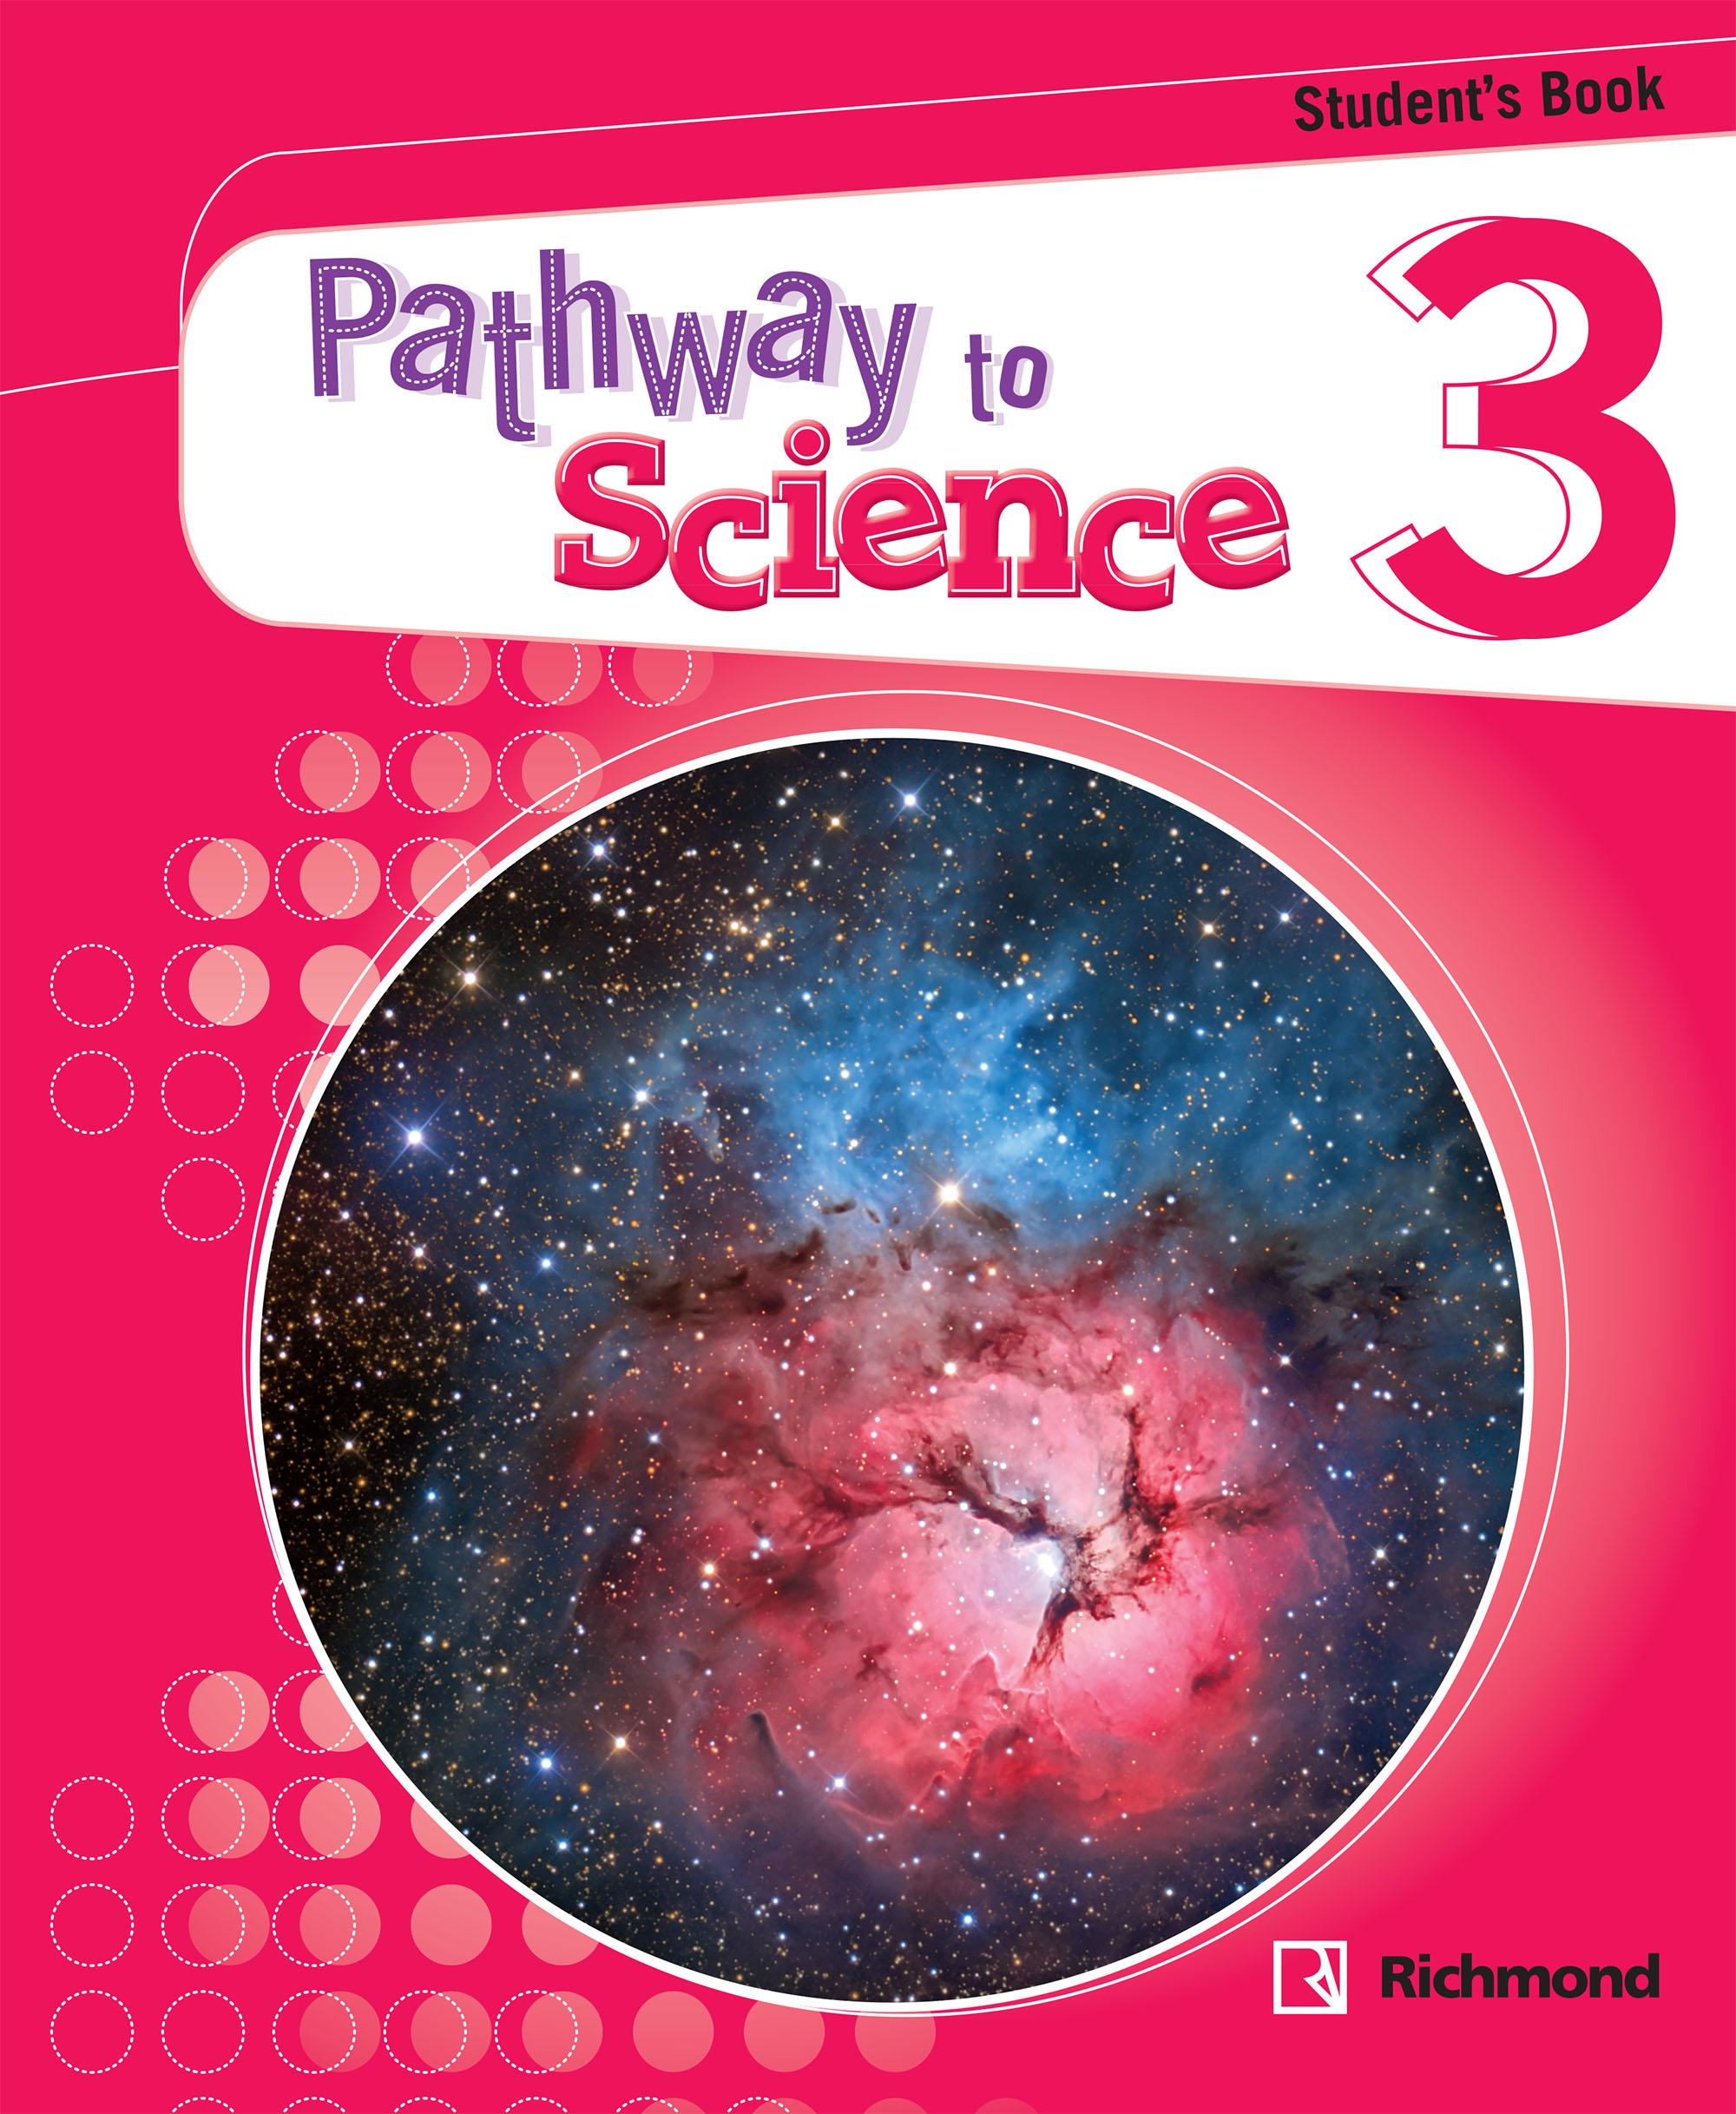 Pathway To Science 3 Pack (Student's Book with Activity Cards)